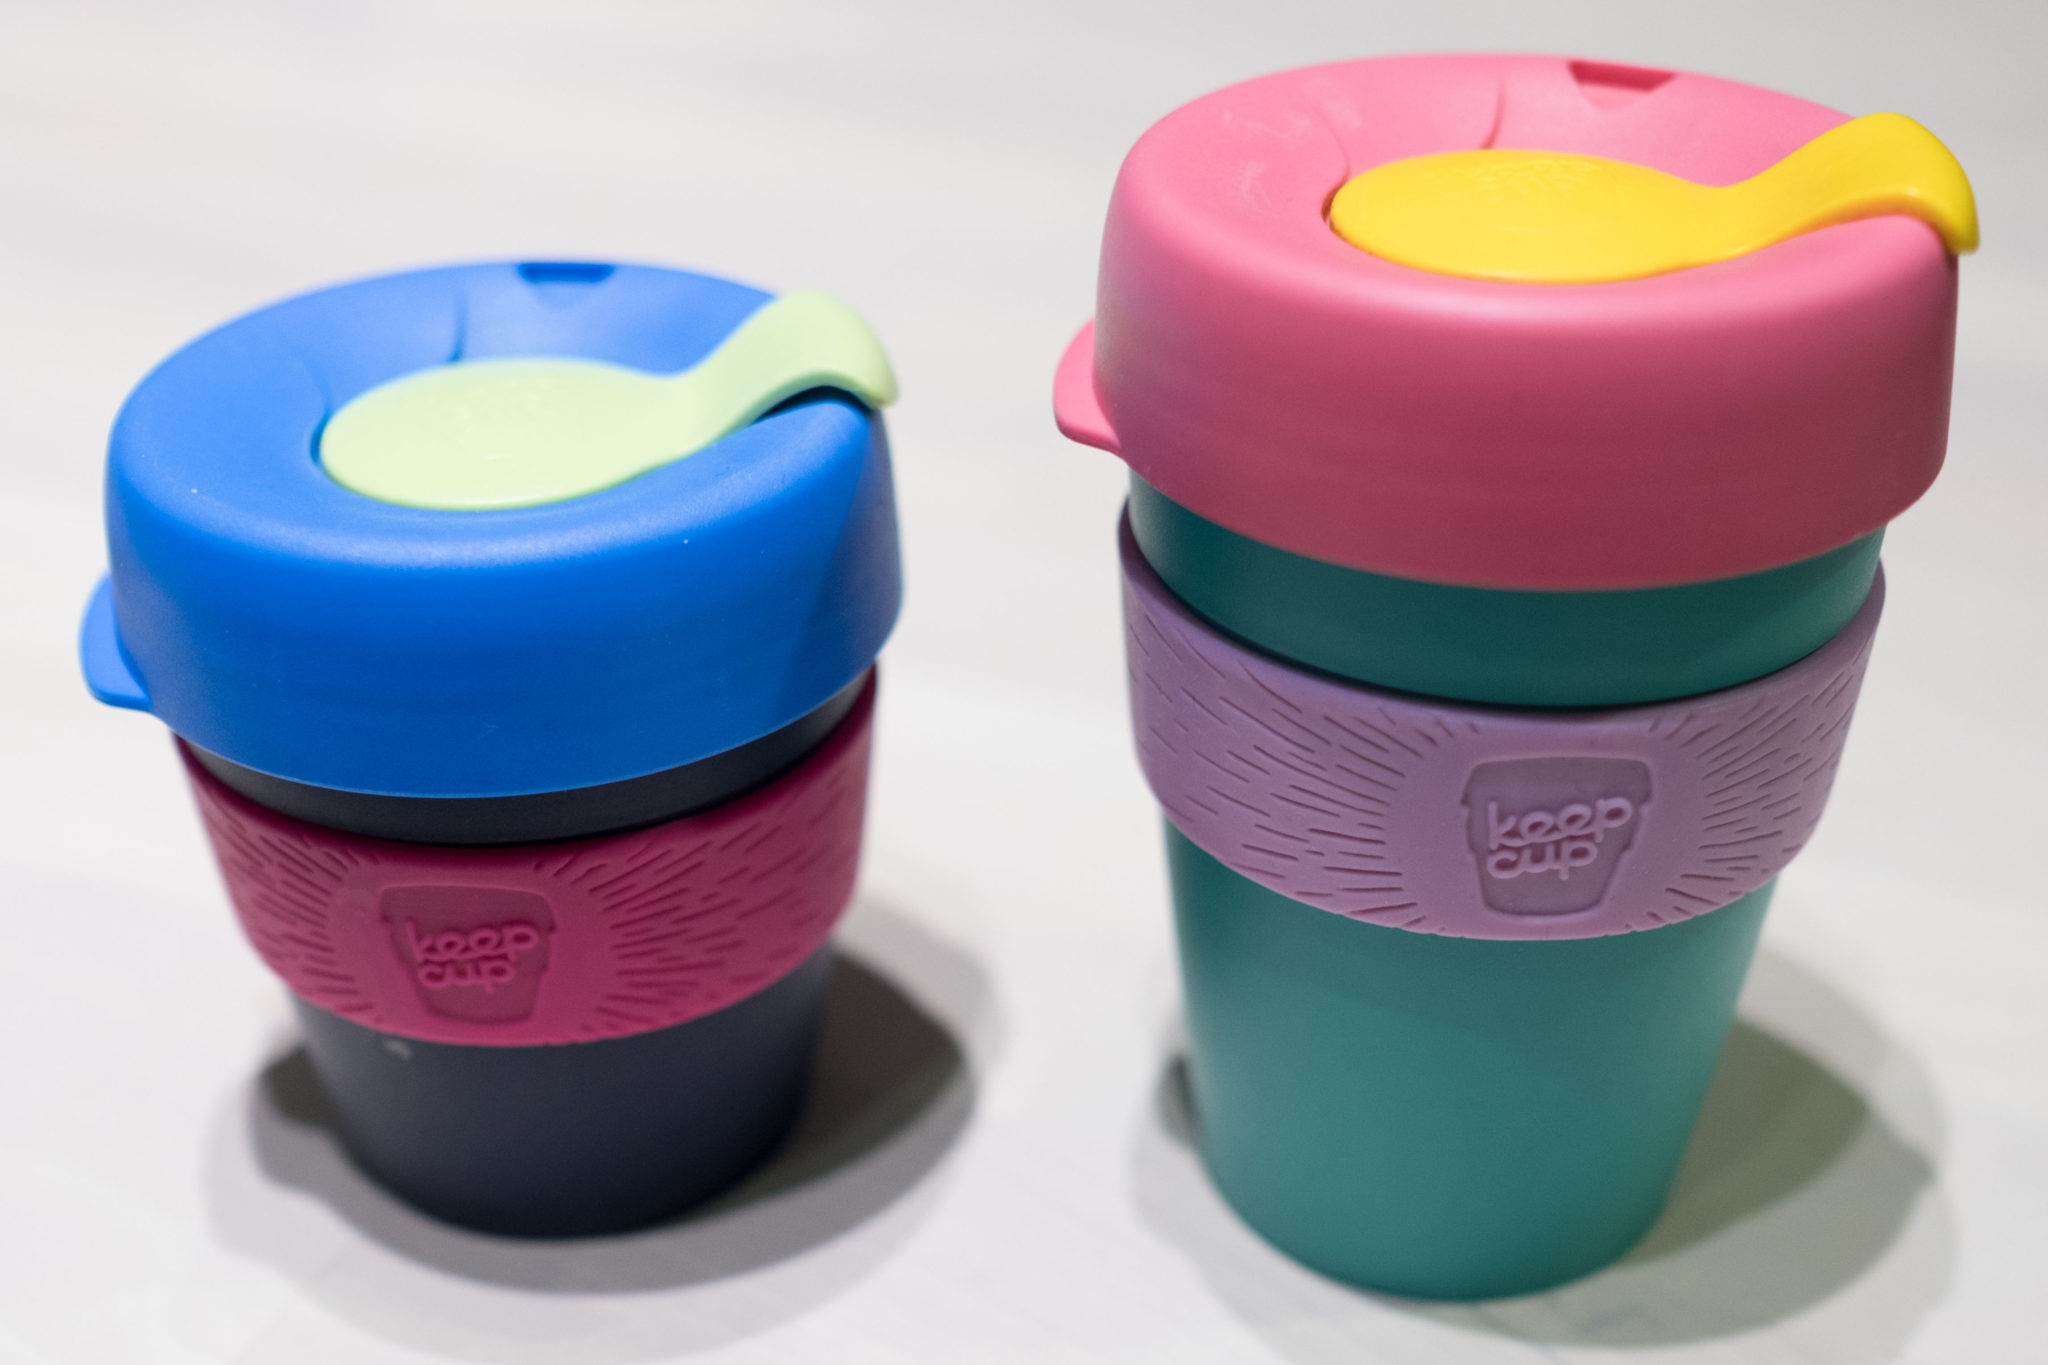 Keep Cup vs Frank Green Reusable Cup Comparison 